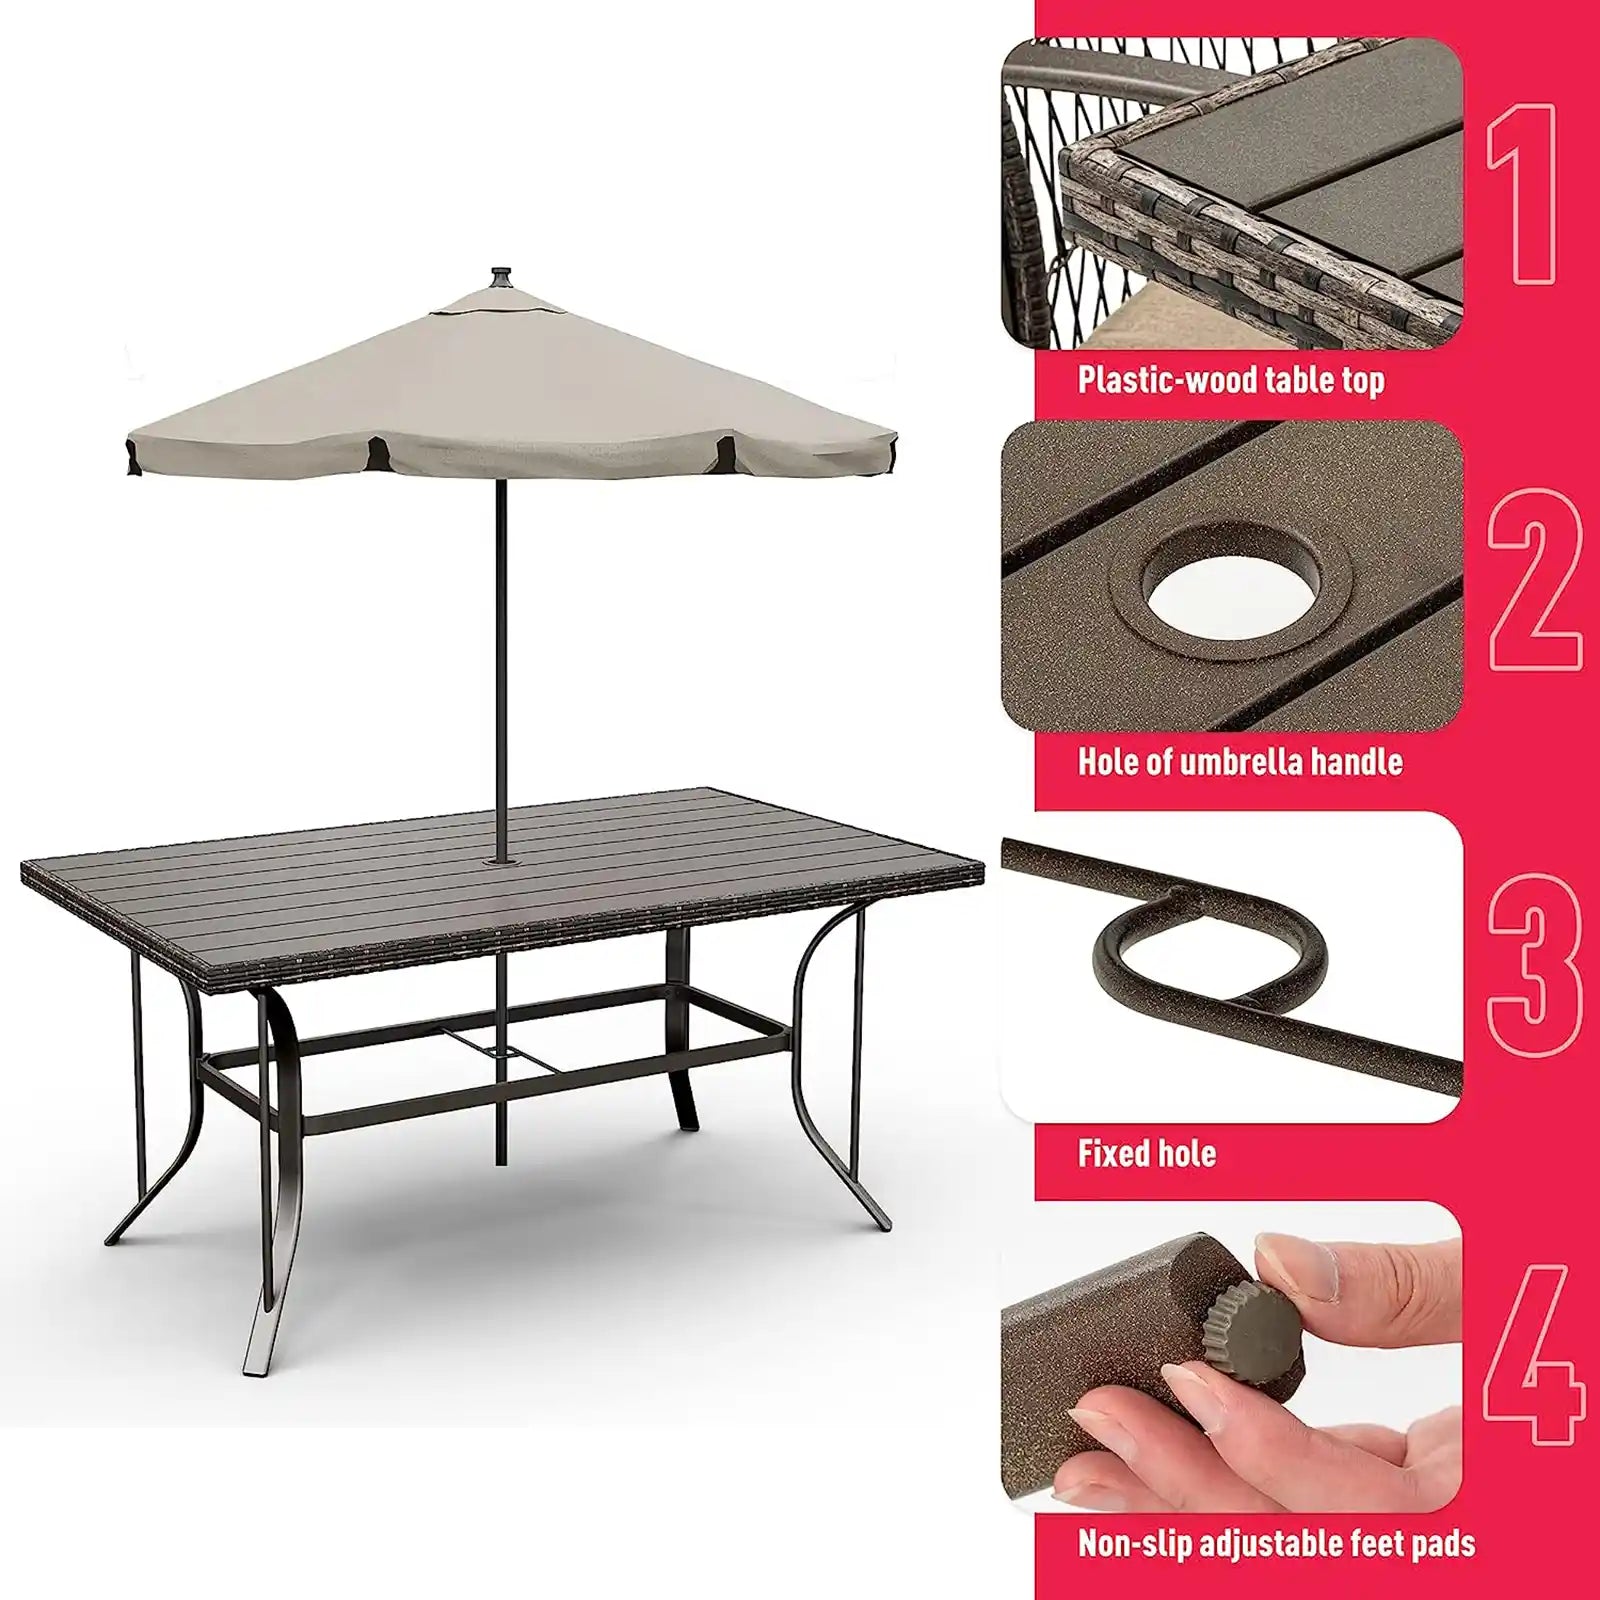 Patio Dining Table Set 5 Piece, Garden Dining Set, Outdoor Wicker Furniture Set with Square Plastic-Wood Table Top and Washable Cushions for Patio Garden Poolside